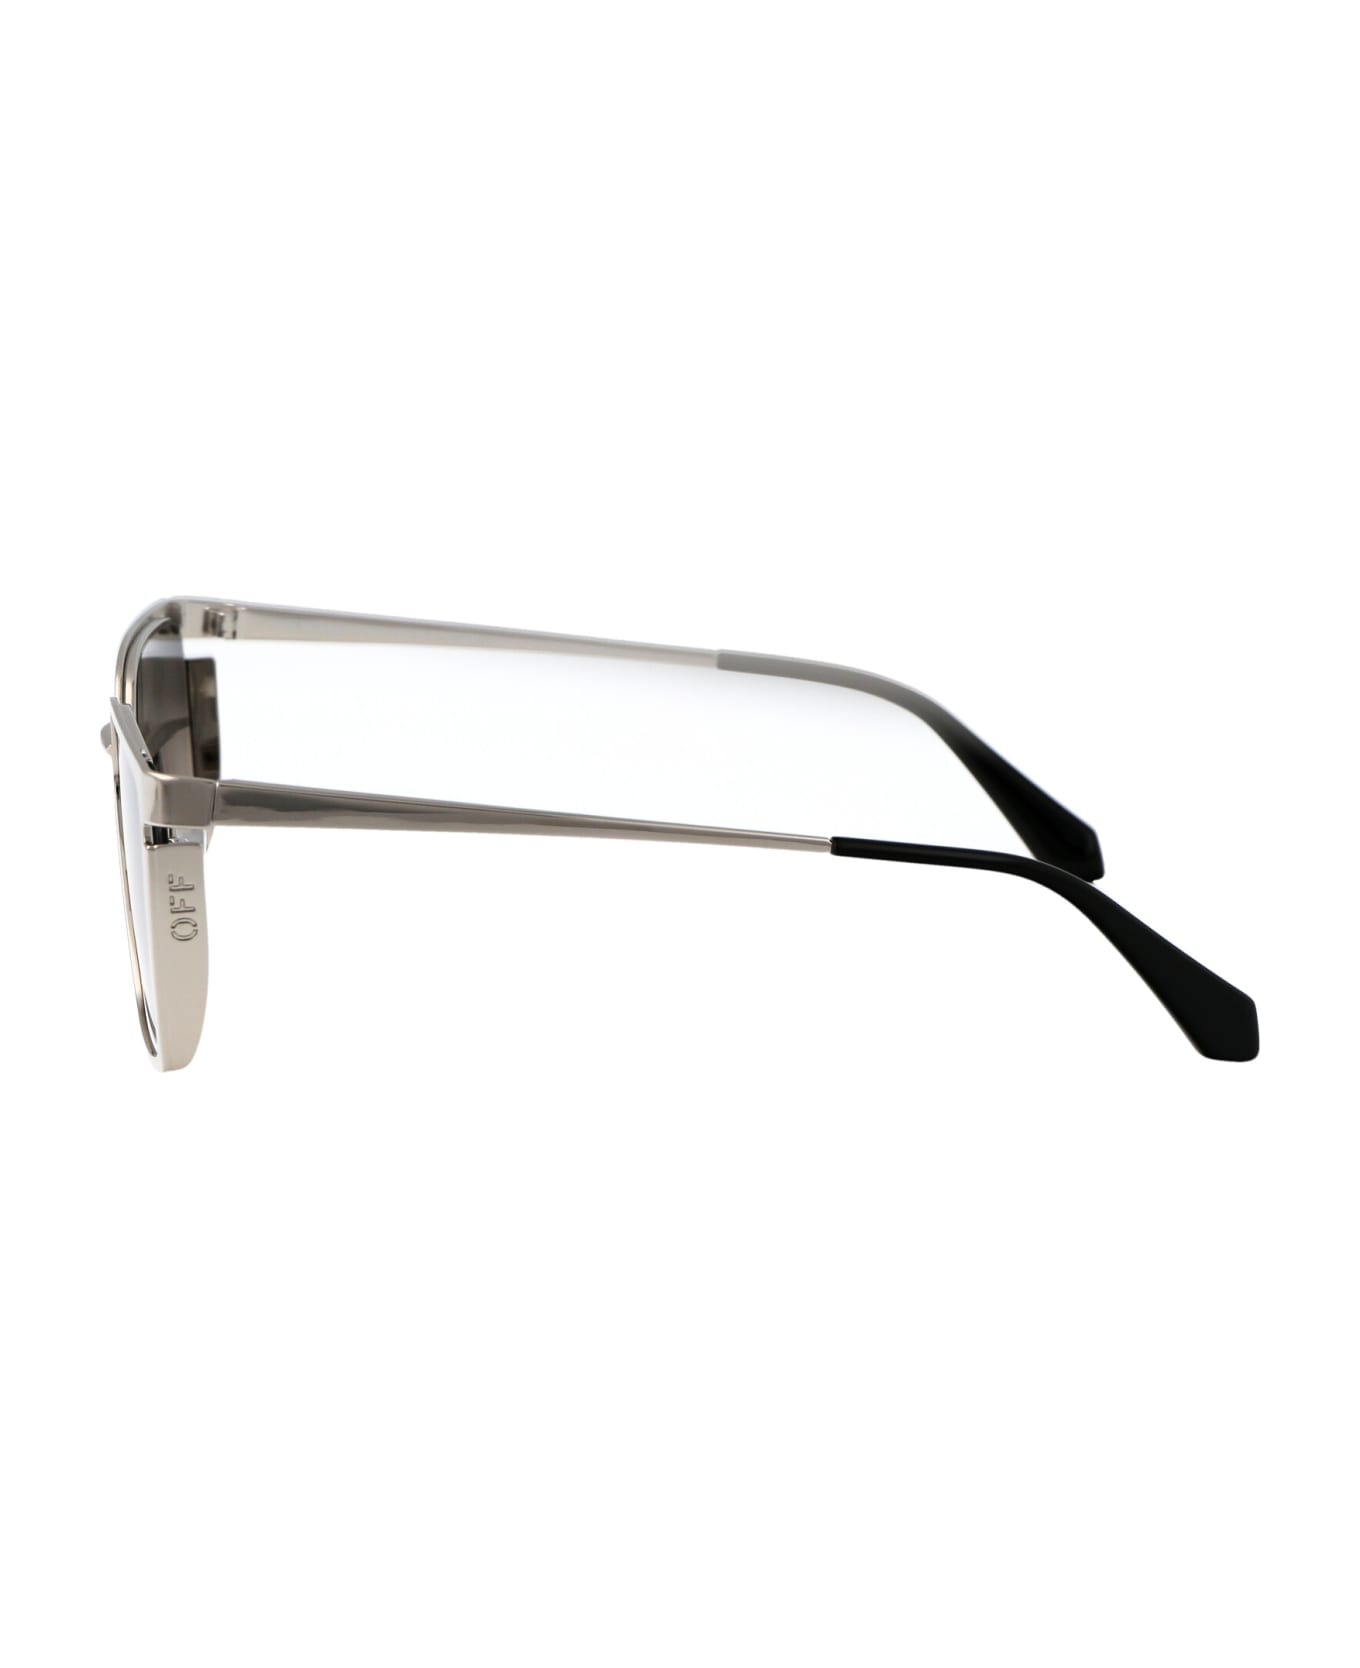 Off-White Yoder Sunglasses - 7207 SILVER サングラス